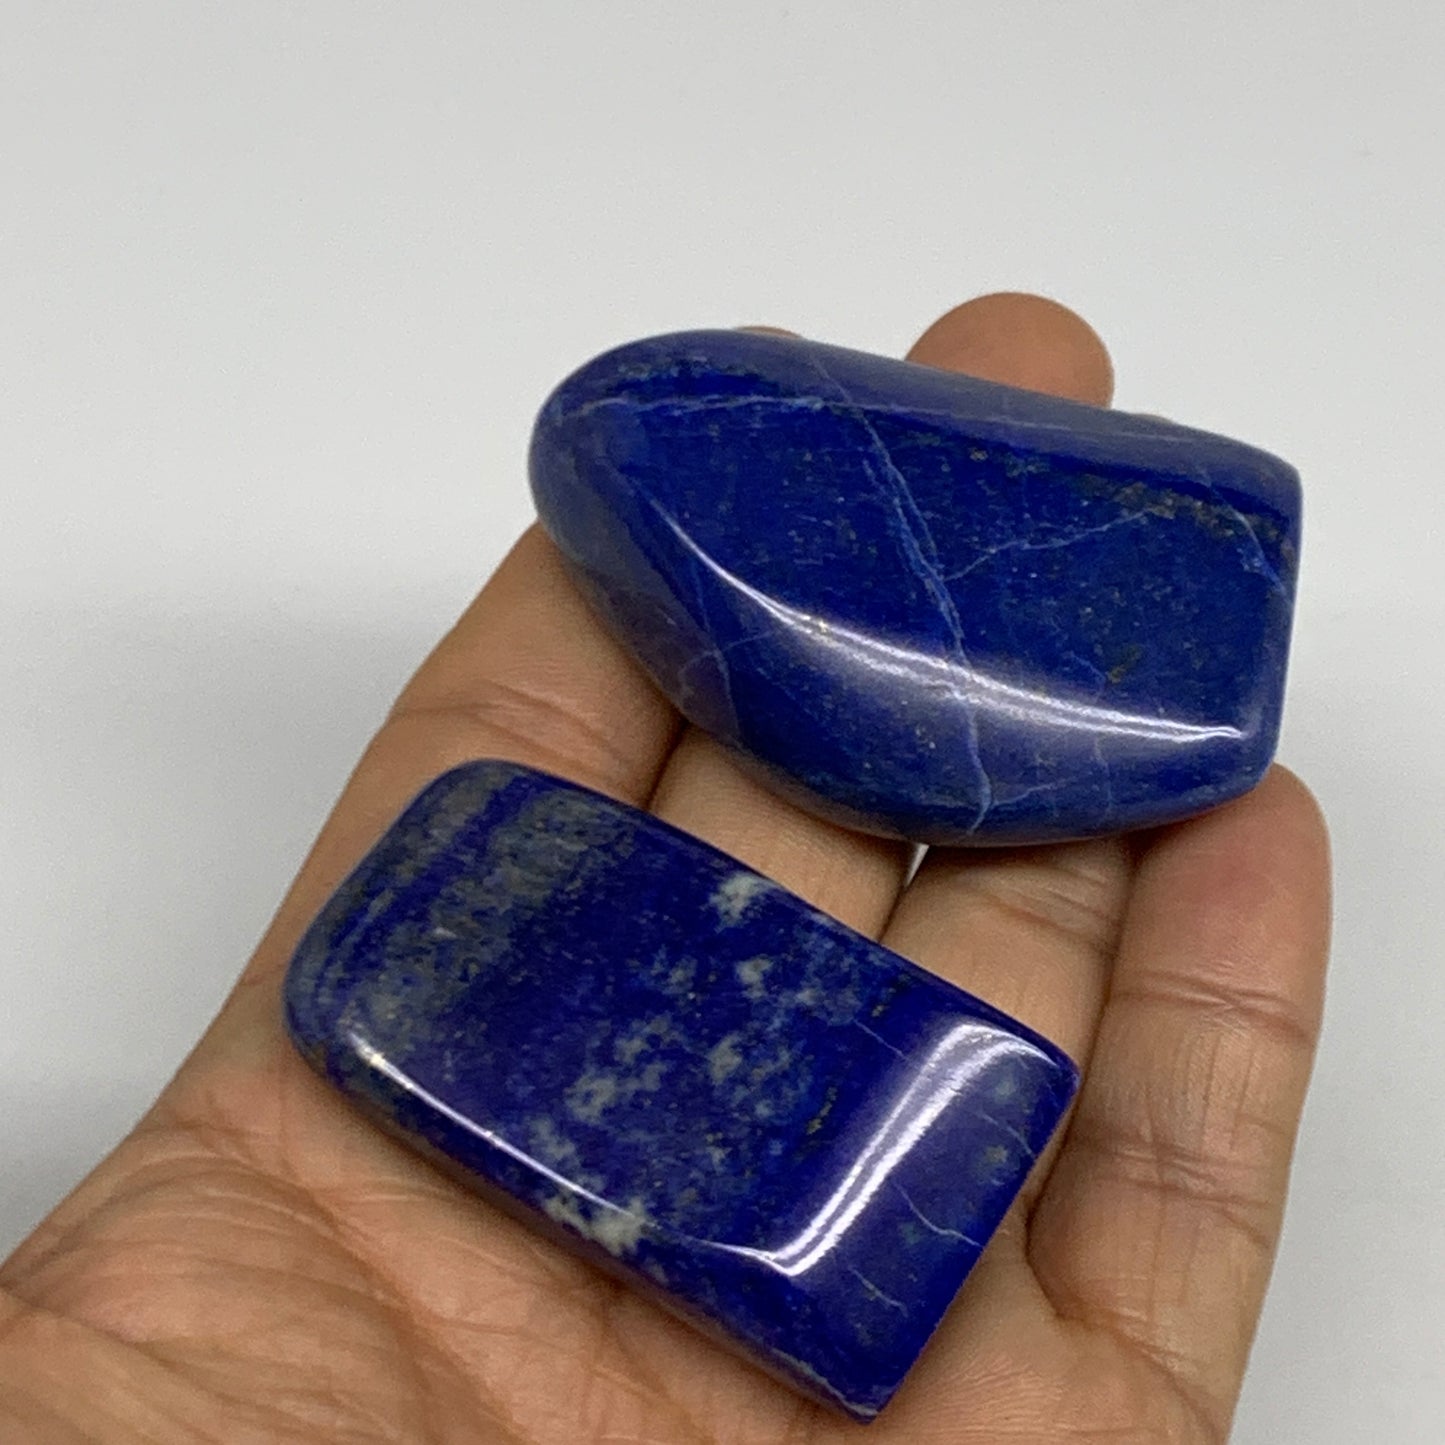 113.9g,2"-2.2", 2pc, Natural Freeform Lapis Lazuli from Afghanistan, B33110